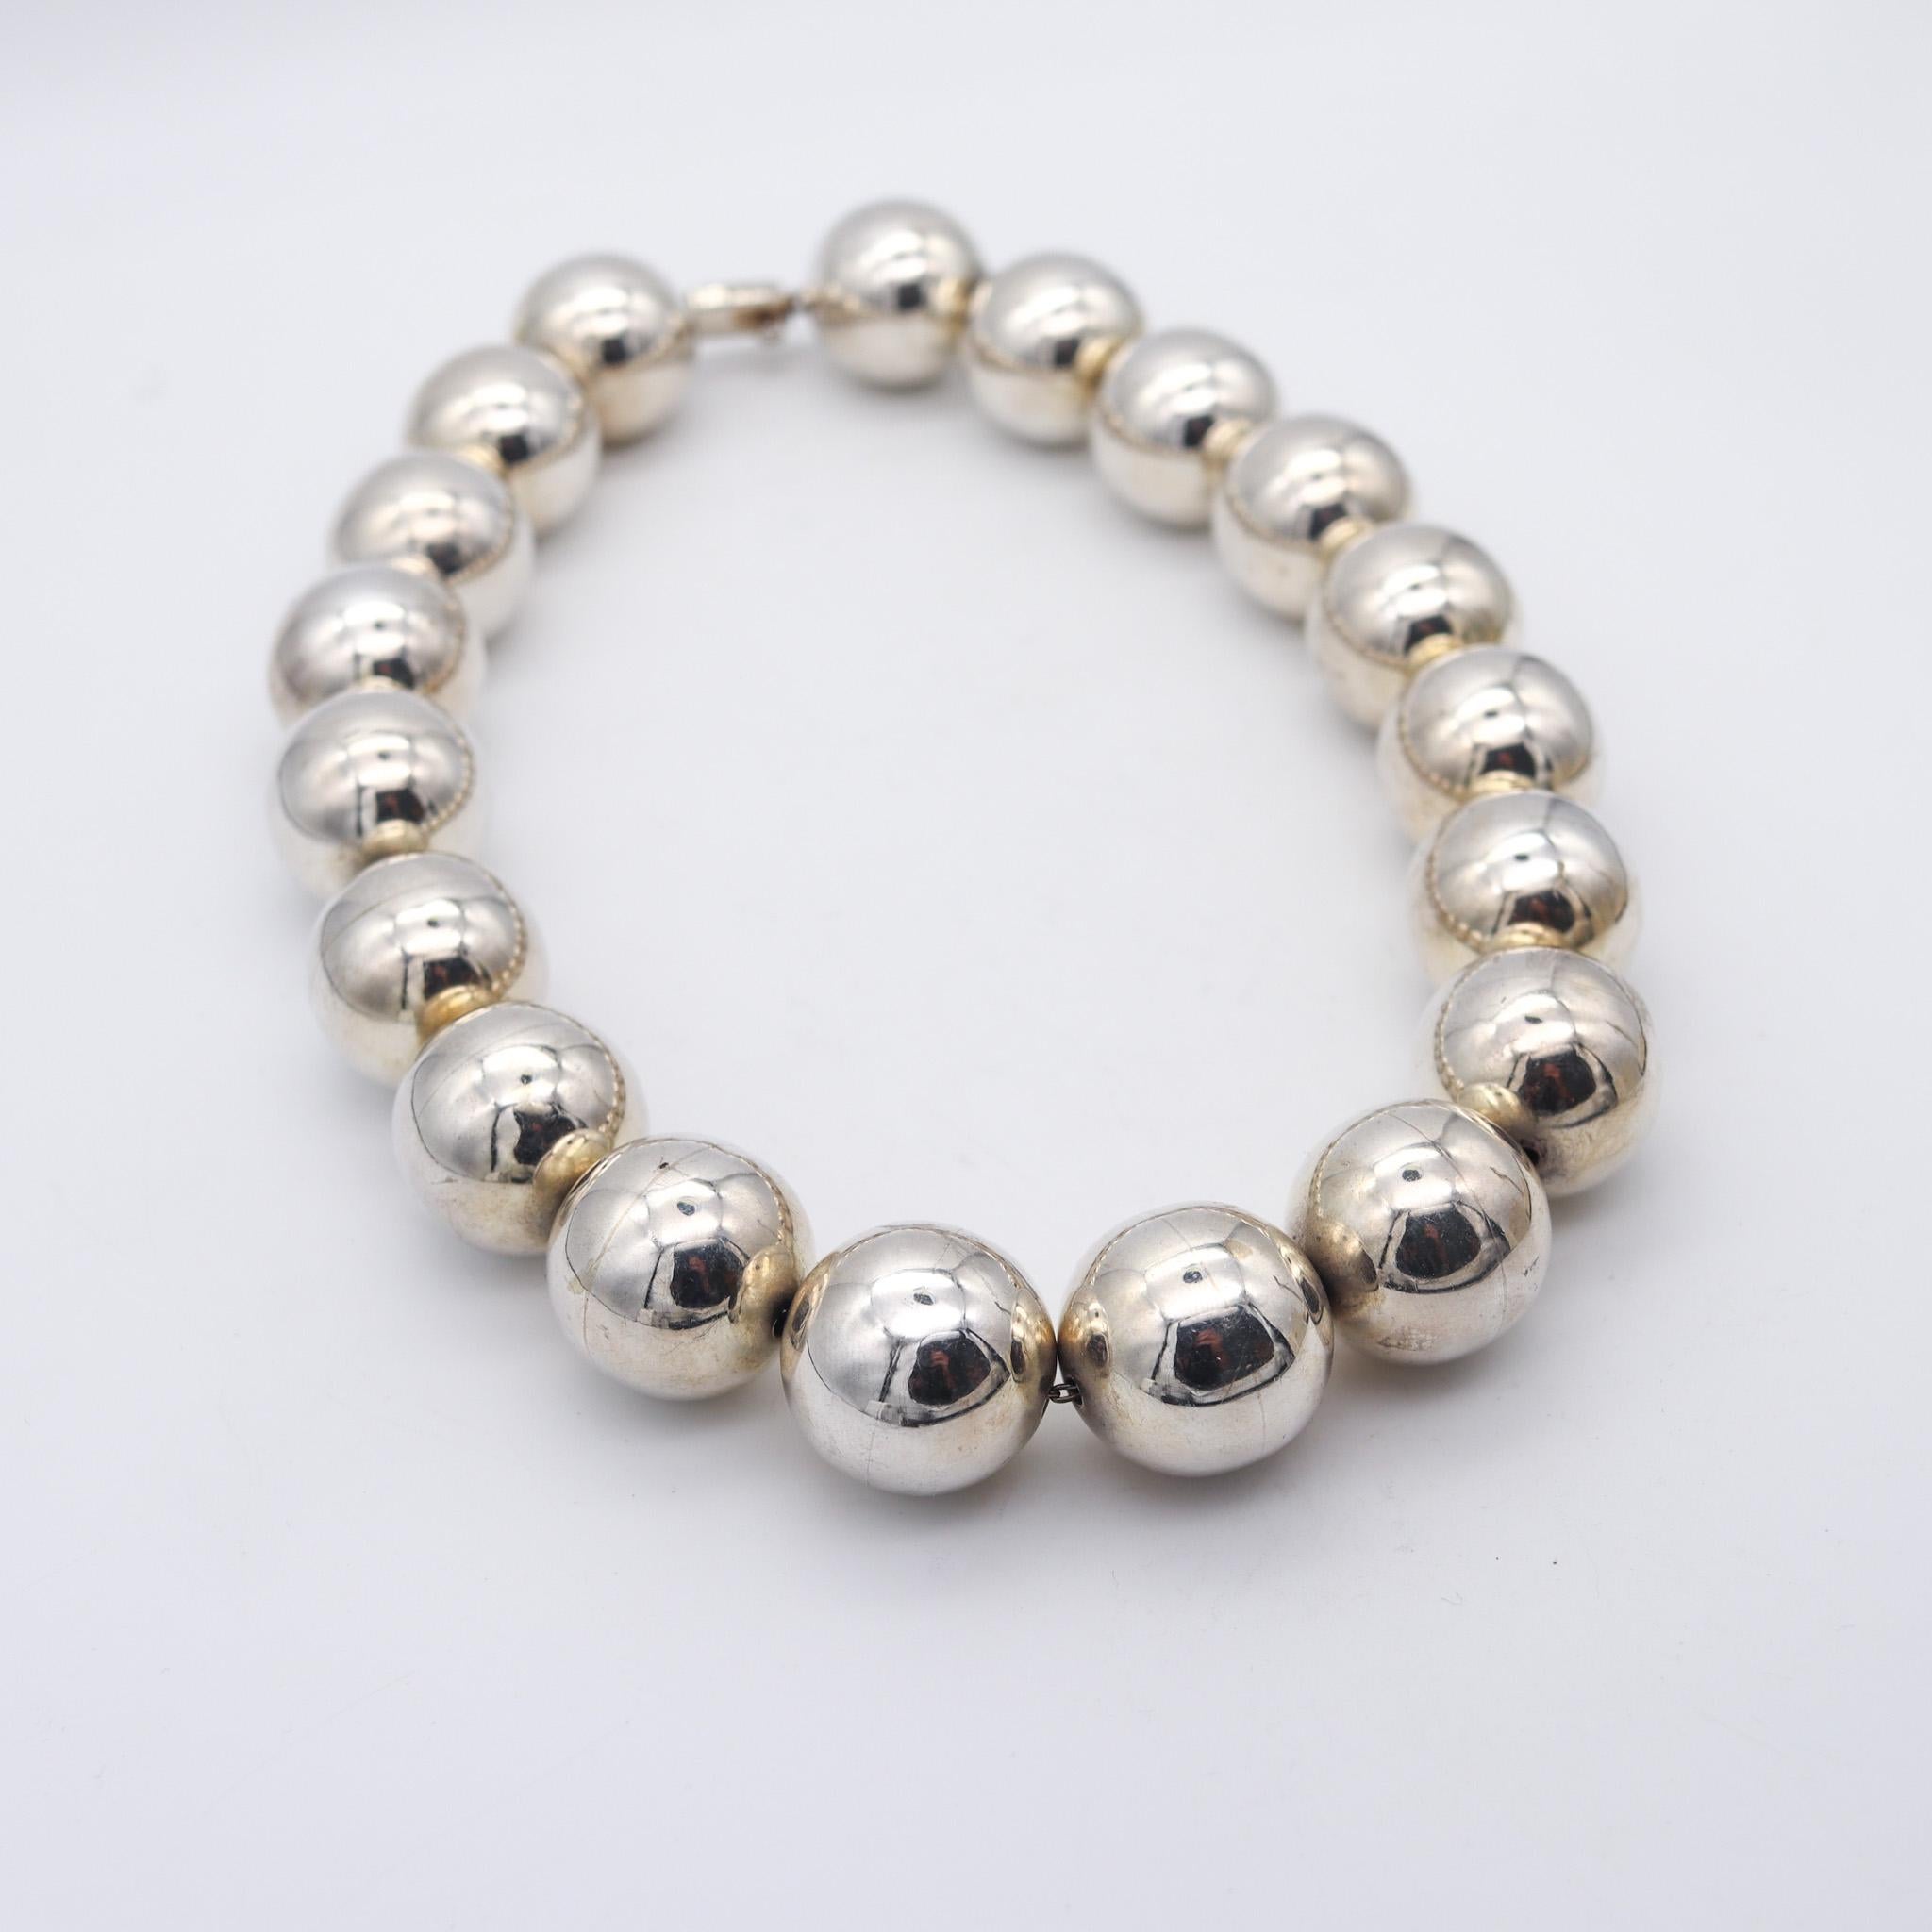 Mexican modernist necklace.

Beautiful spheric balls necklace, created in the city of Taxco in Mexico, back in the 1970. This substantial and bold necklace has been crafted in solid .925/.999 sterling silver with high polished finish. The design is